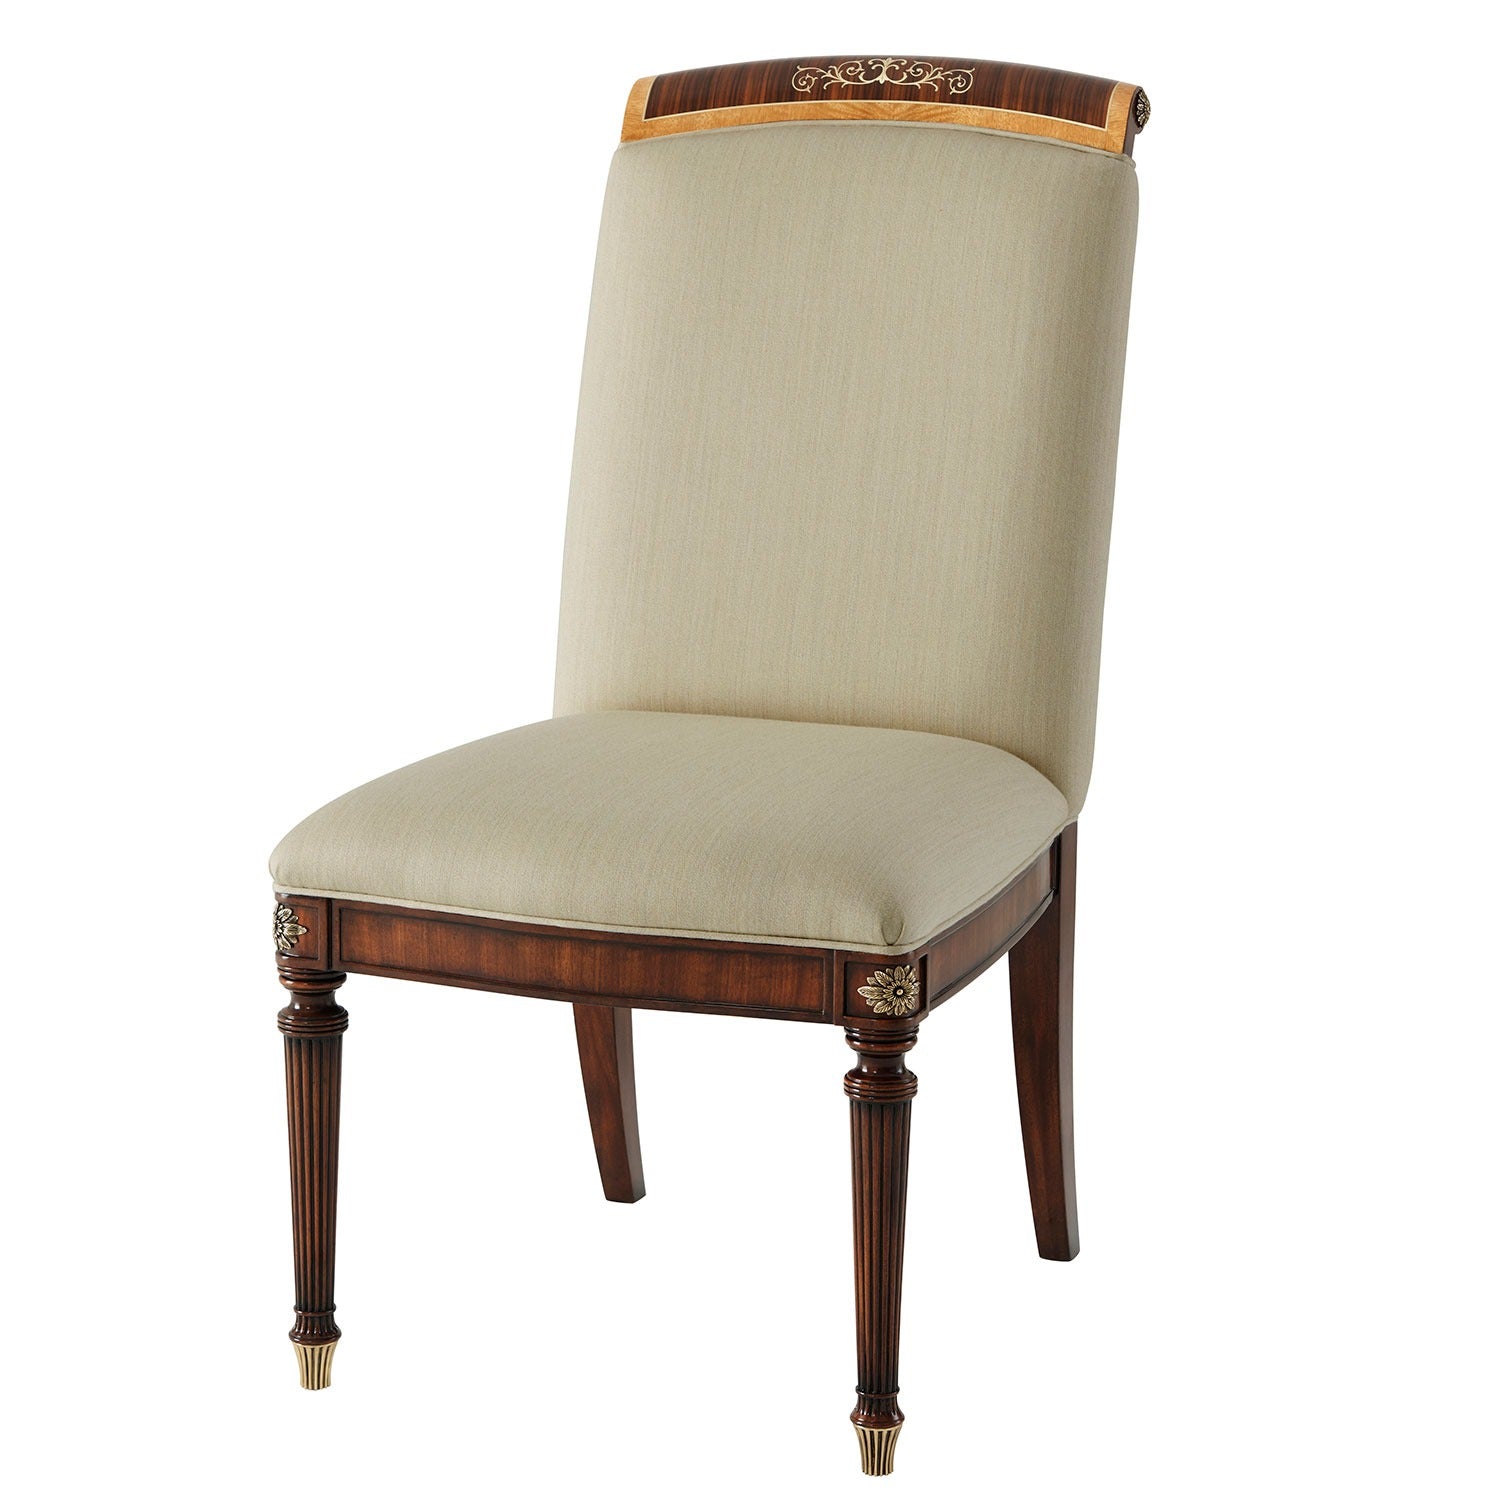 Upholstered Side Chair with Floral Brass Inlay